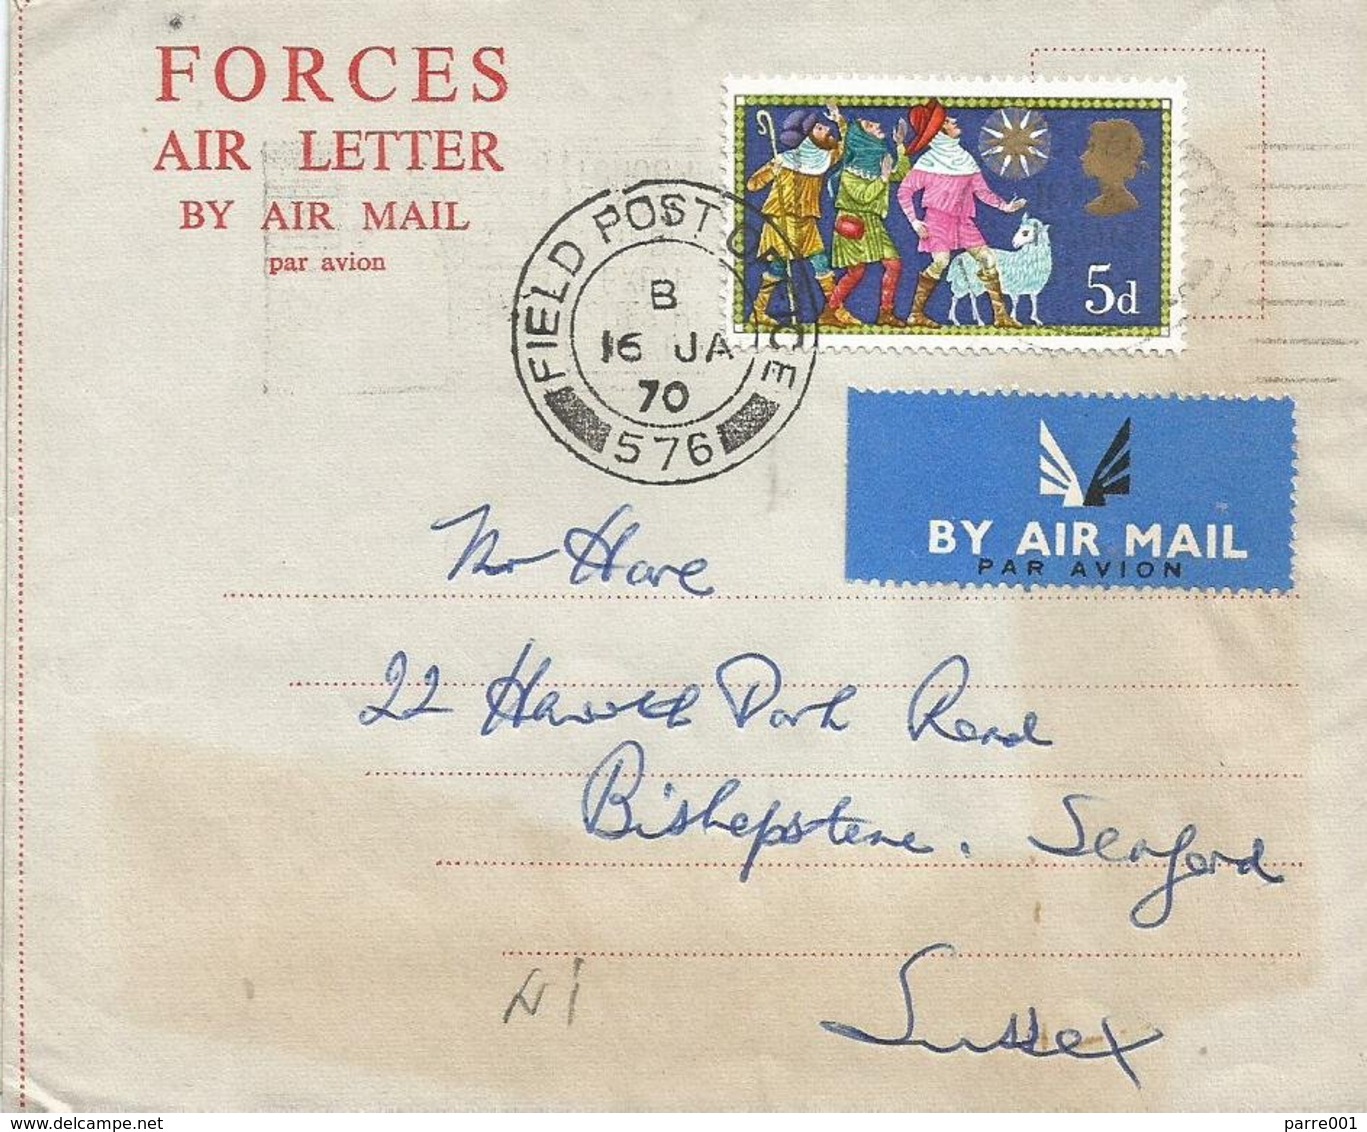 Northern Ireland UK 1970 FPO 576 Lisburn IRA Campaign Forces Air Letter - Northern Ireland